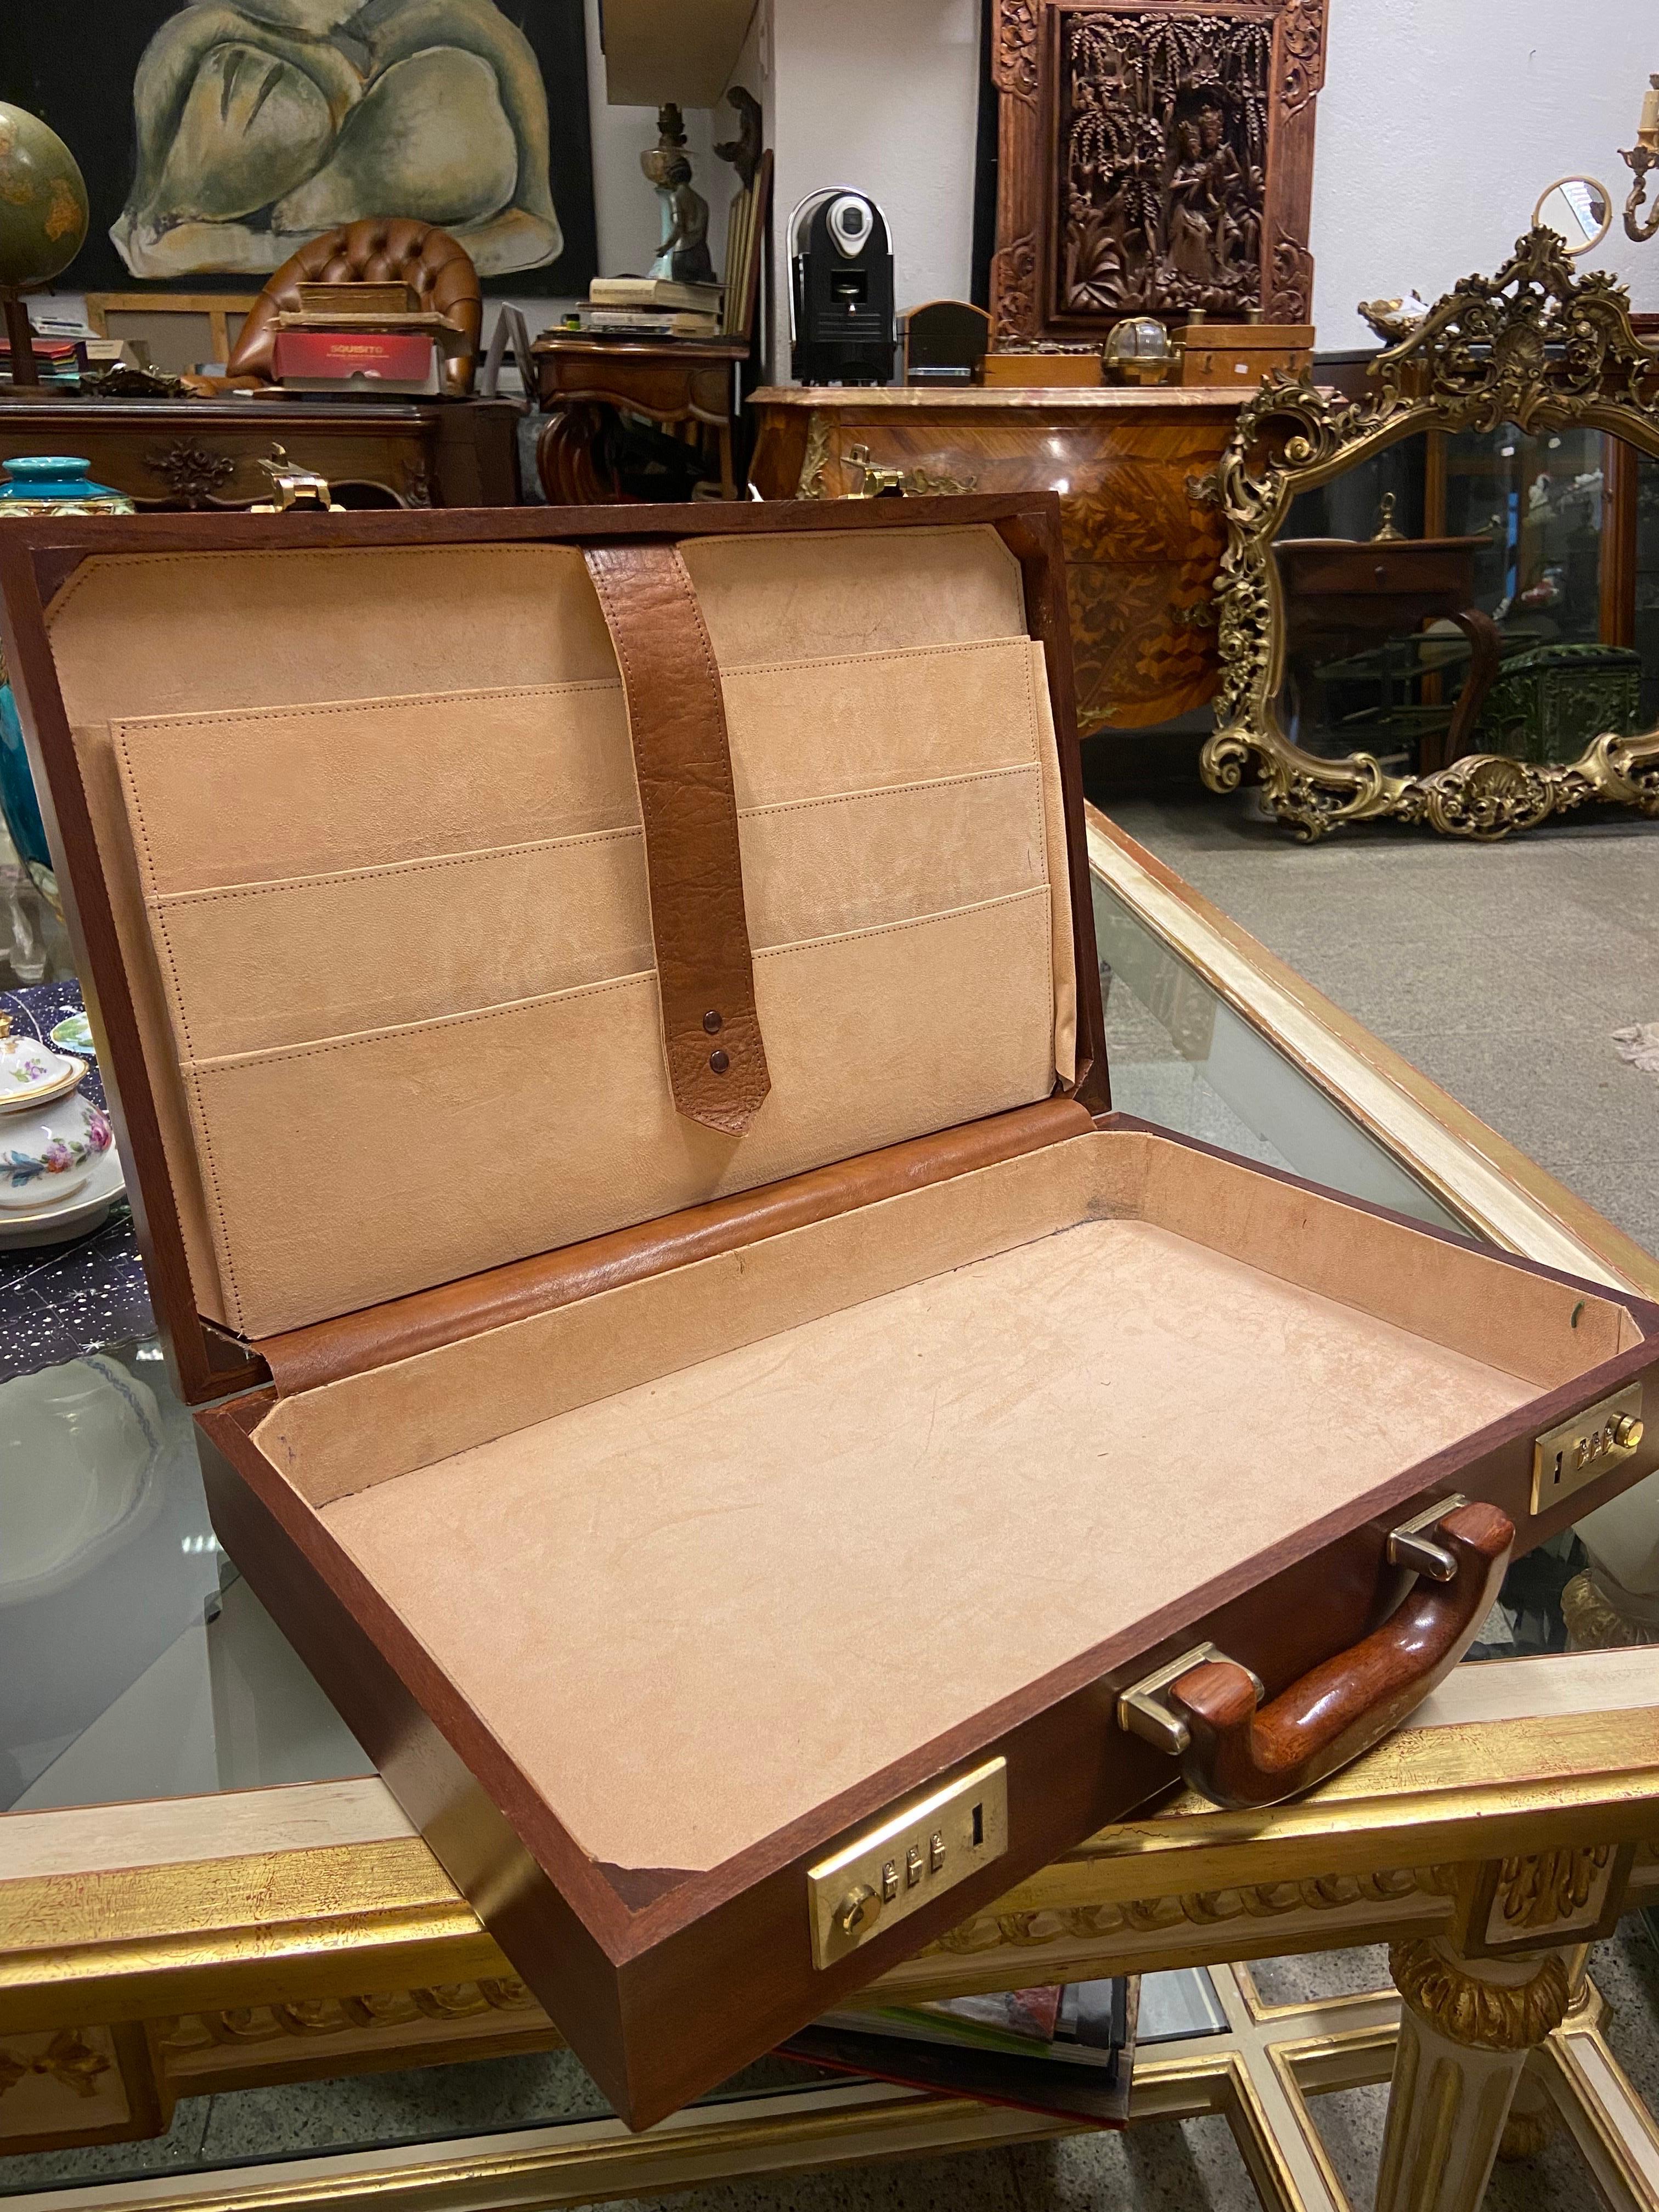 Elegant vintage briefcase constructed from several woods, burr walnut veneer, with combination locks and wooden handle, the interior with light beige suede lining and pockets with brown leather trim, the case measuring 60 x 40 x 7 cm overall. Very